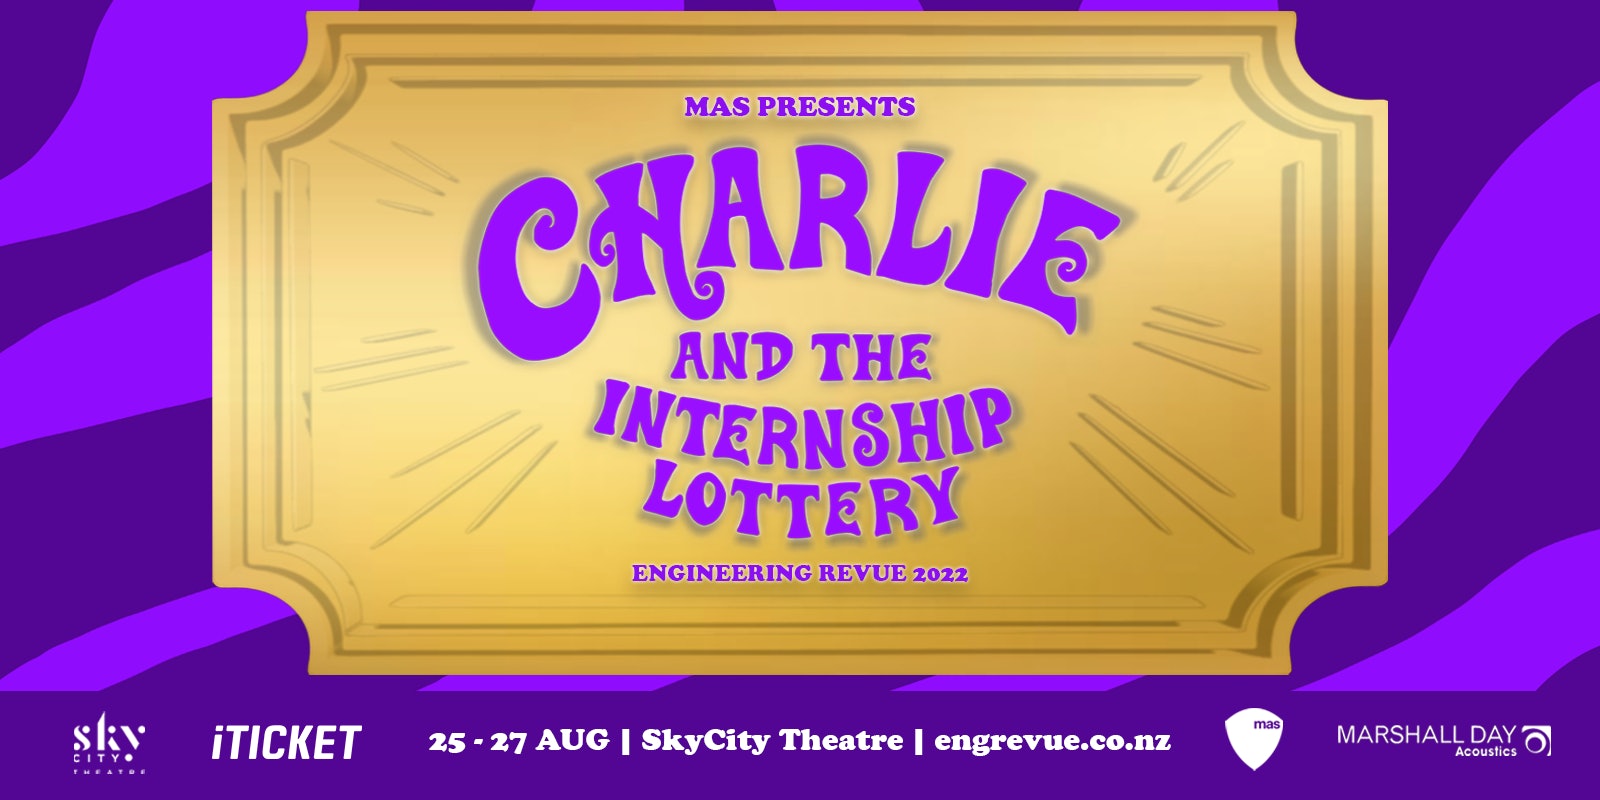 Charlie and the Internship Lottery